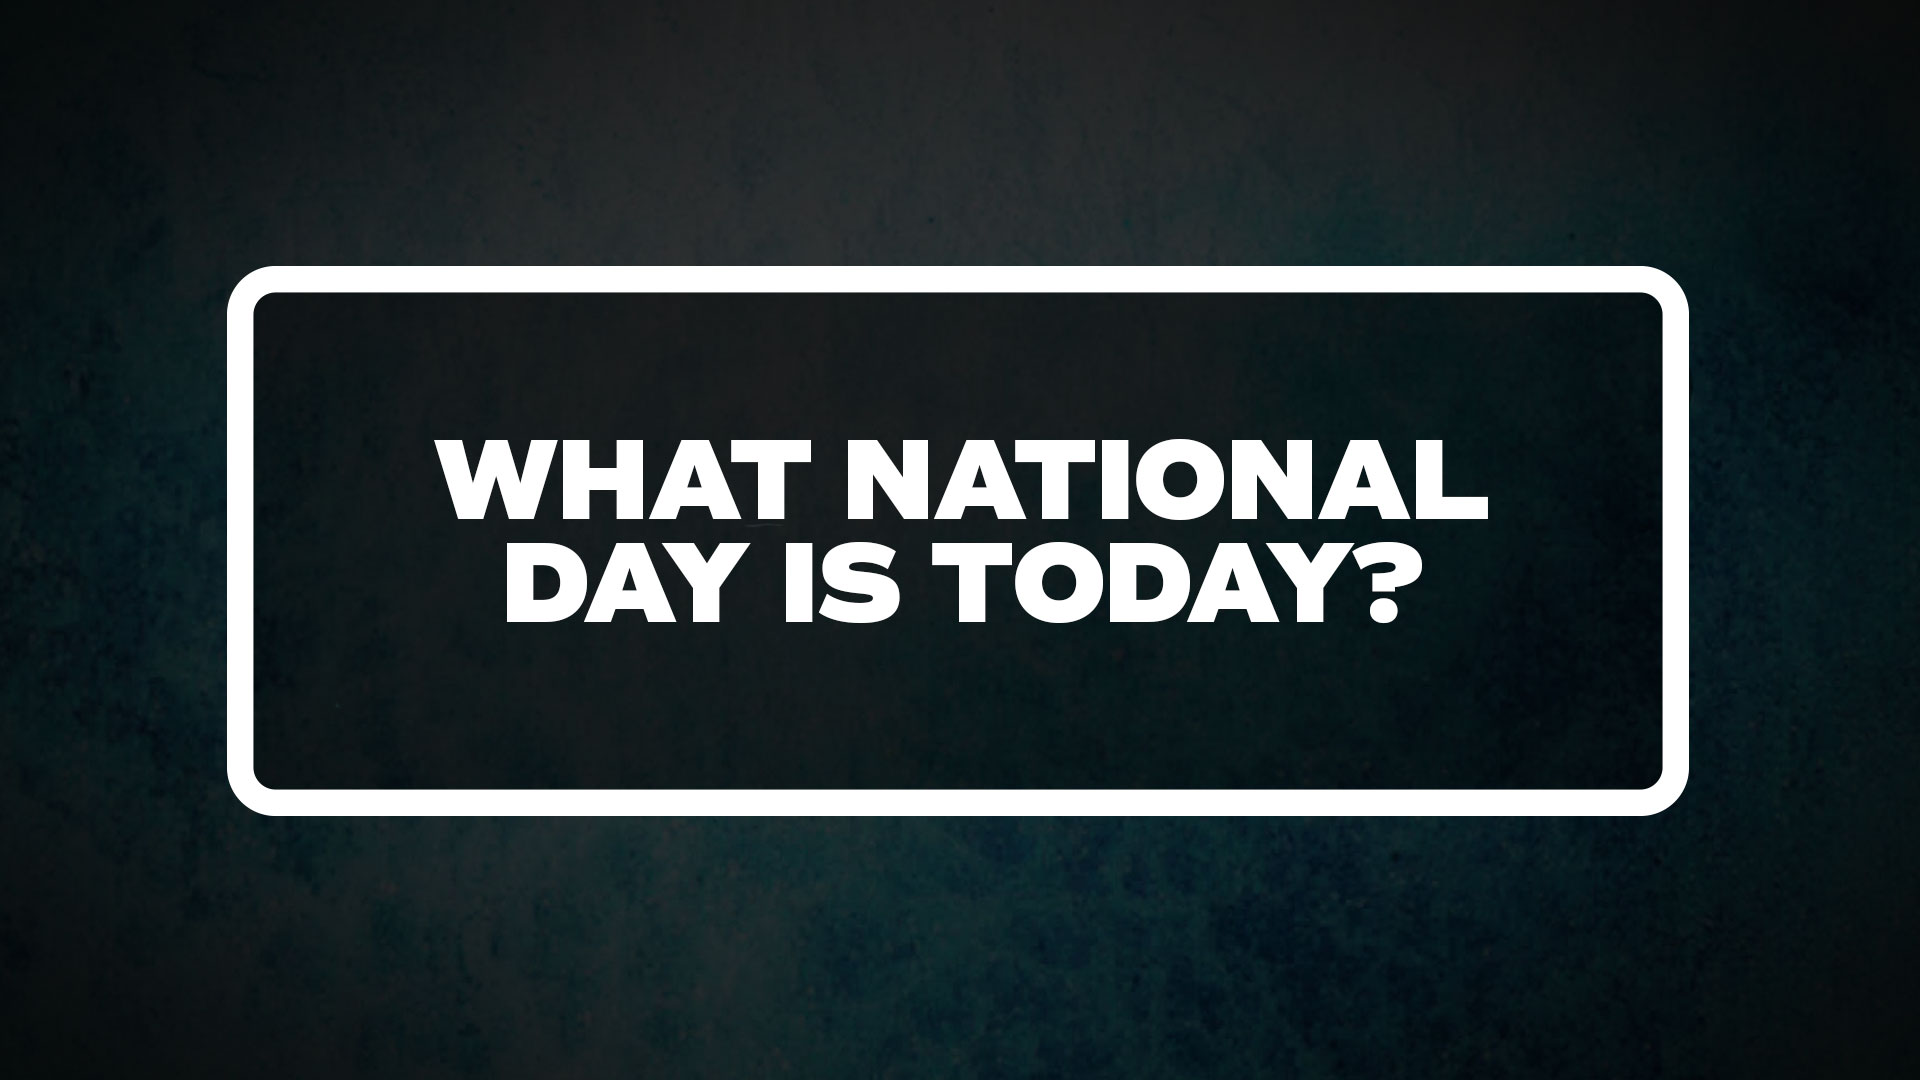 What national day is today?